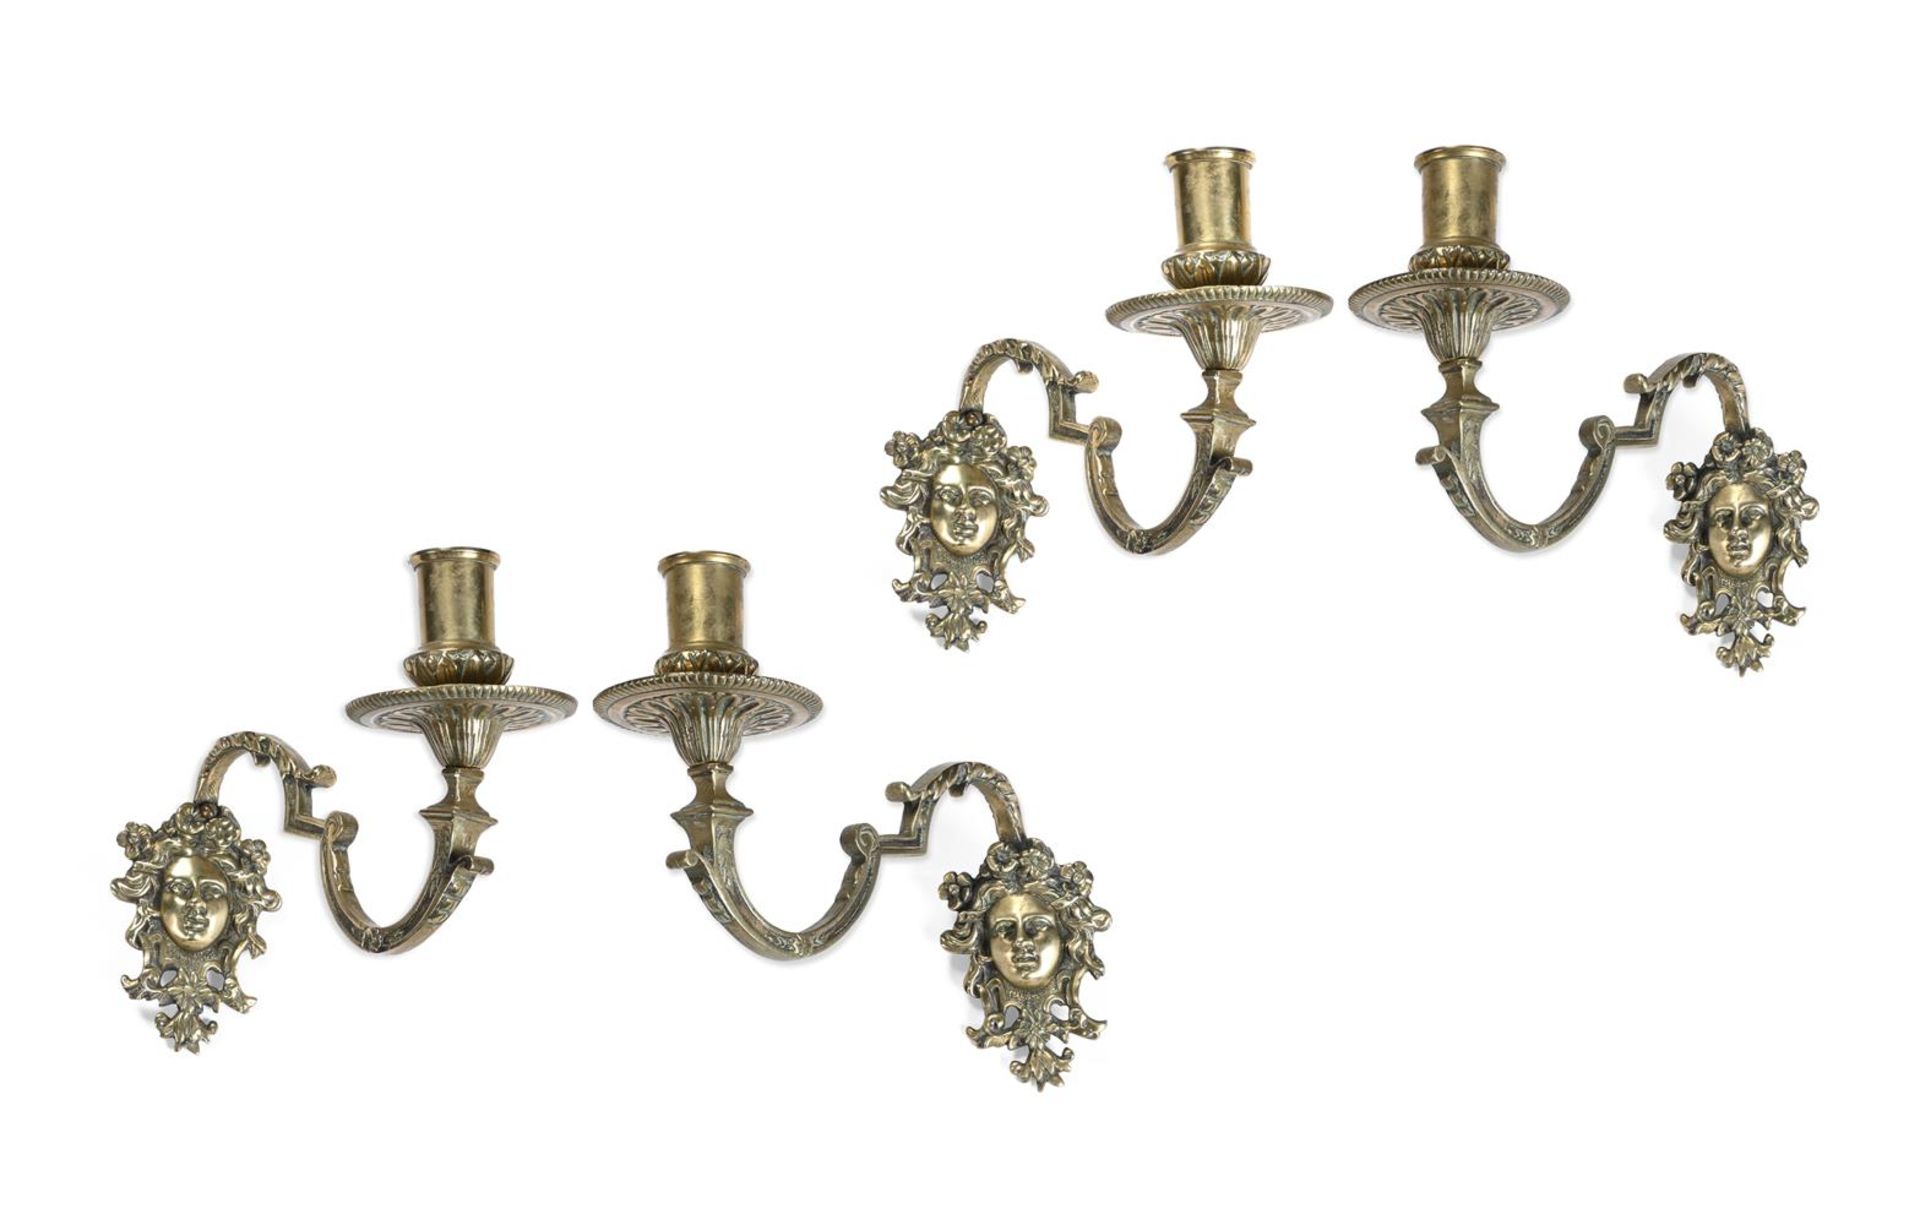 TWO PAIRS OF BRASS WALL LIGHTS PROBABLY FRENCH, 18TH OR 19TH CENTURY